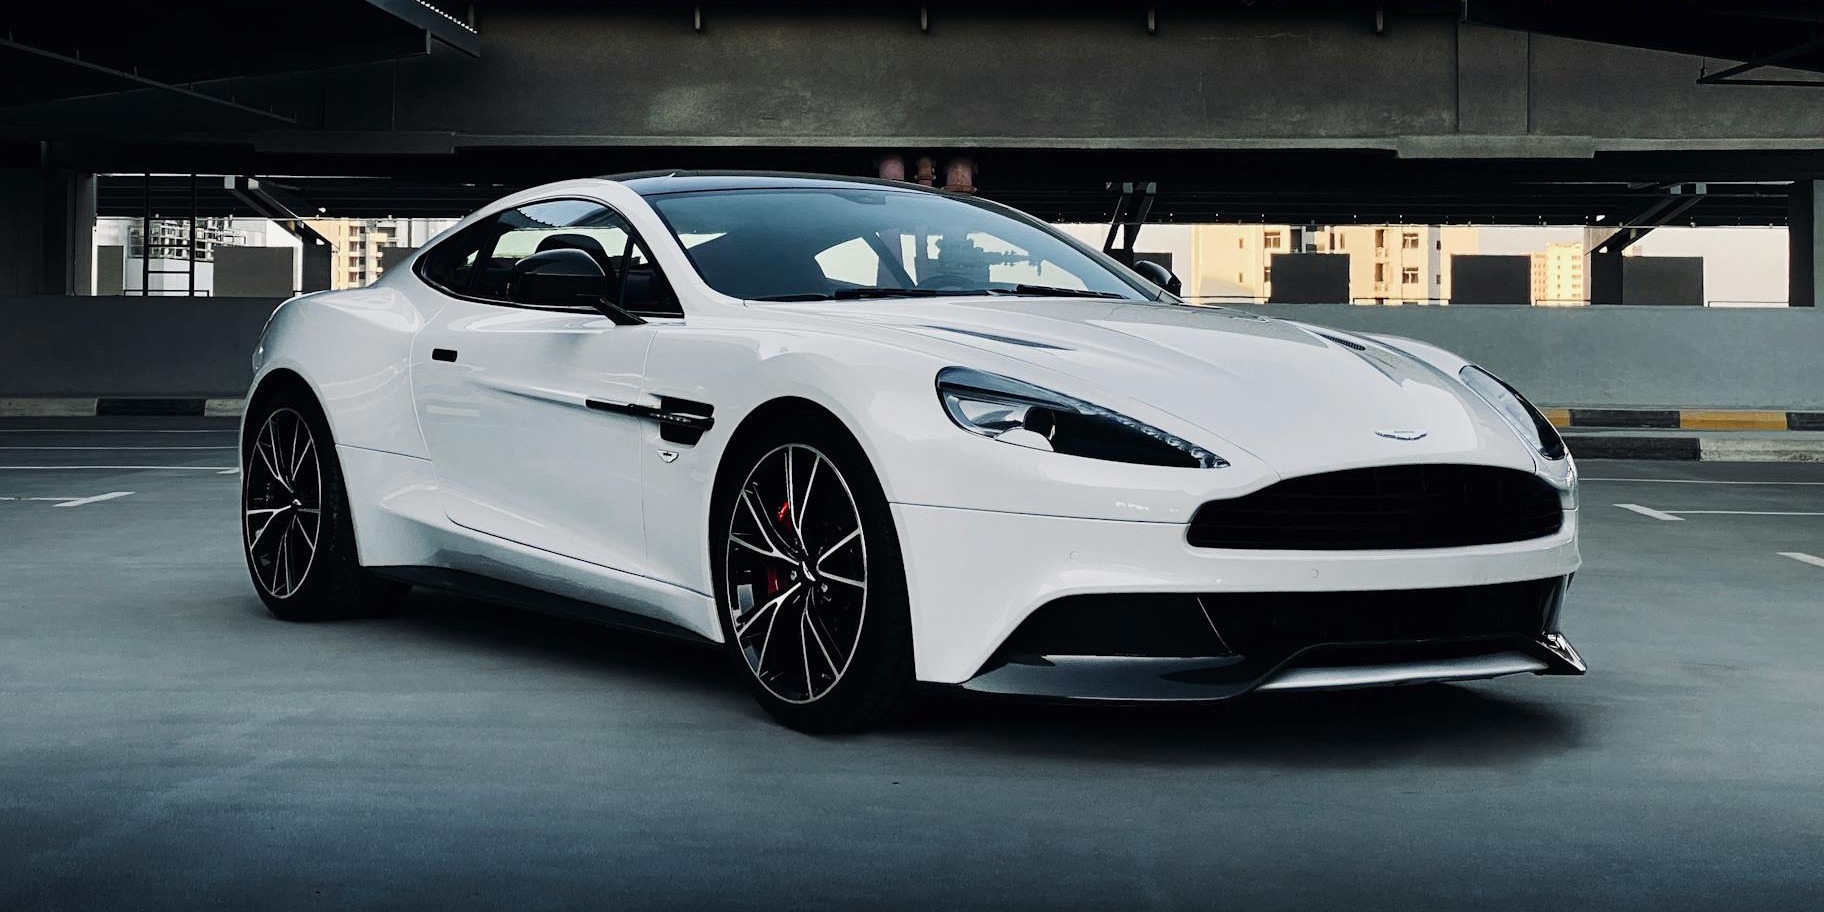 Top Tips for Driving an Aston Martin on UK Roads